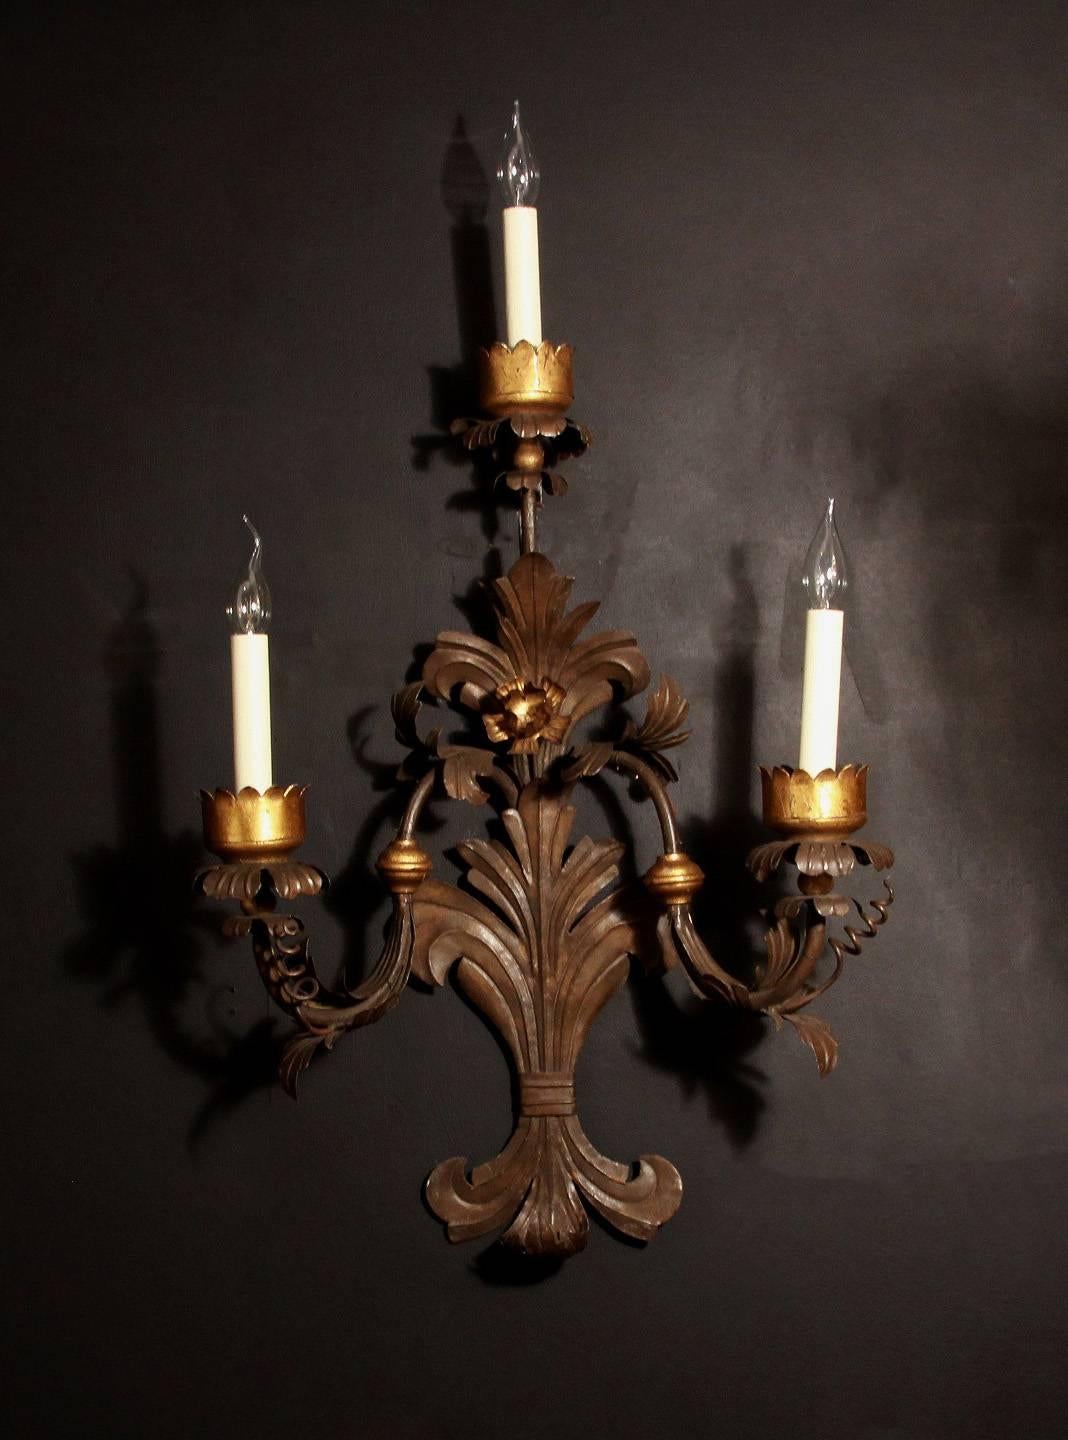 A large pair of three light, metal tole scrolling wall lights. With outward swept arms in the 17th century style, with gold leaf decoration applied.